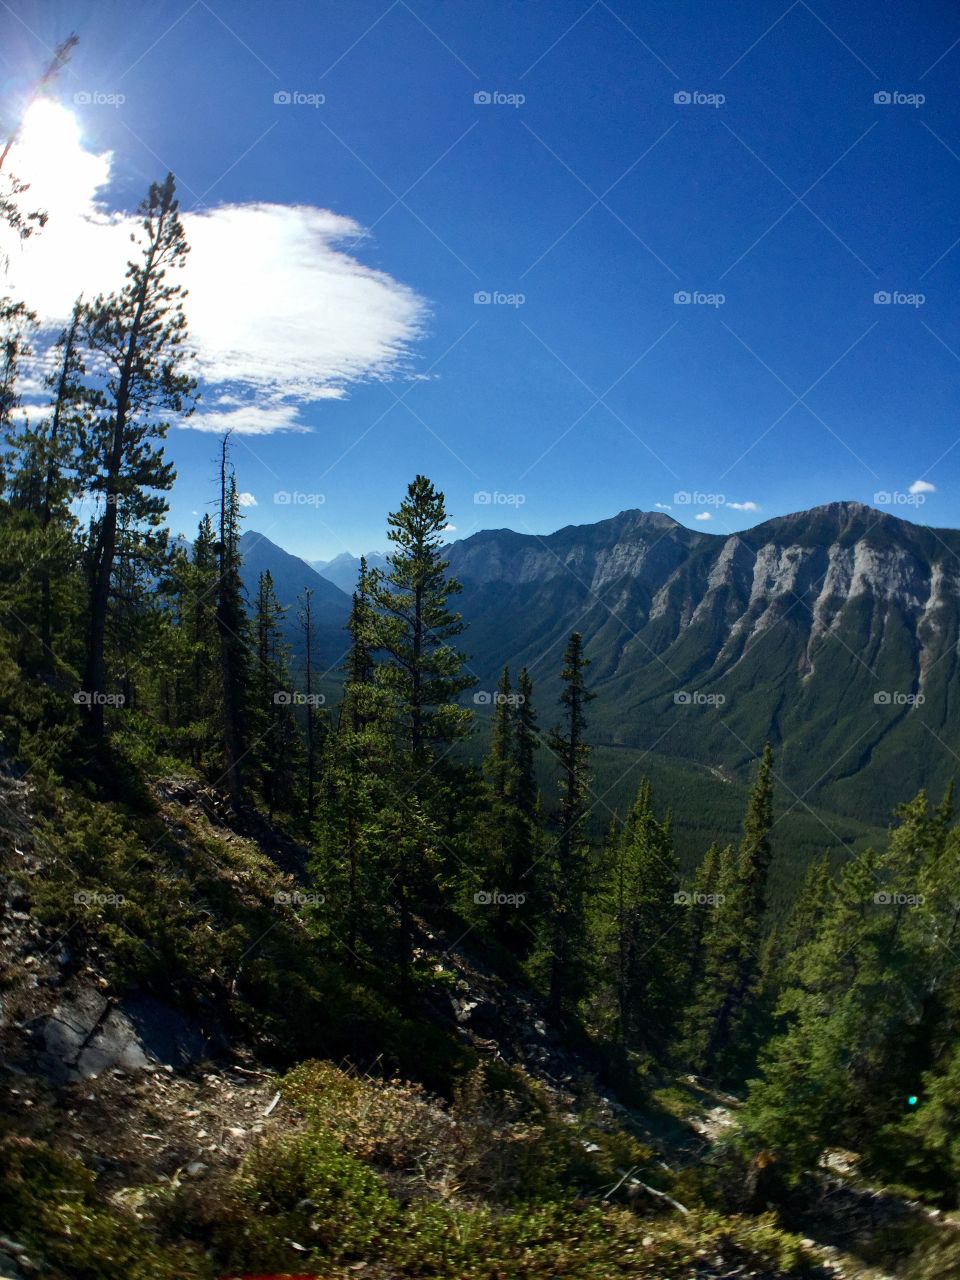 View of banff national park